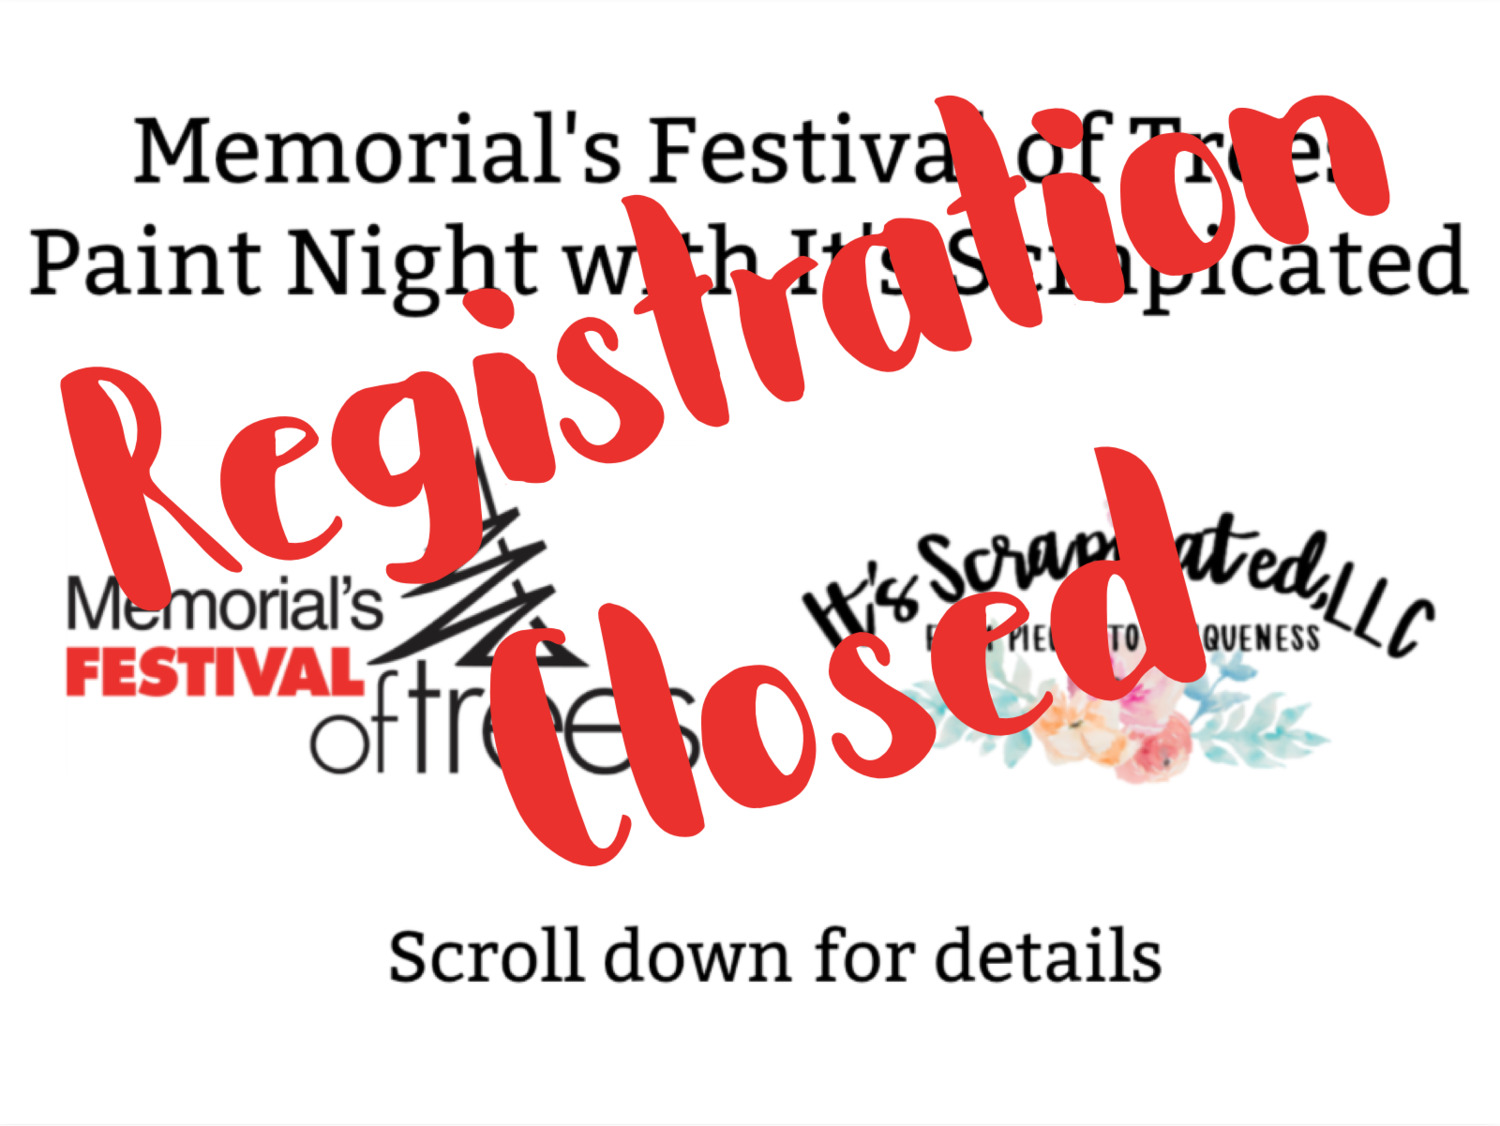 Memorial’s Festival of Trees Paint Night with It’s Scrapicated - Tuesday, Nov. 13, 2018 (4:30 p.m. - 8:30 p.m)